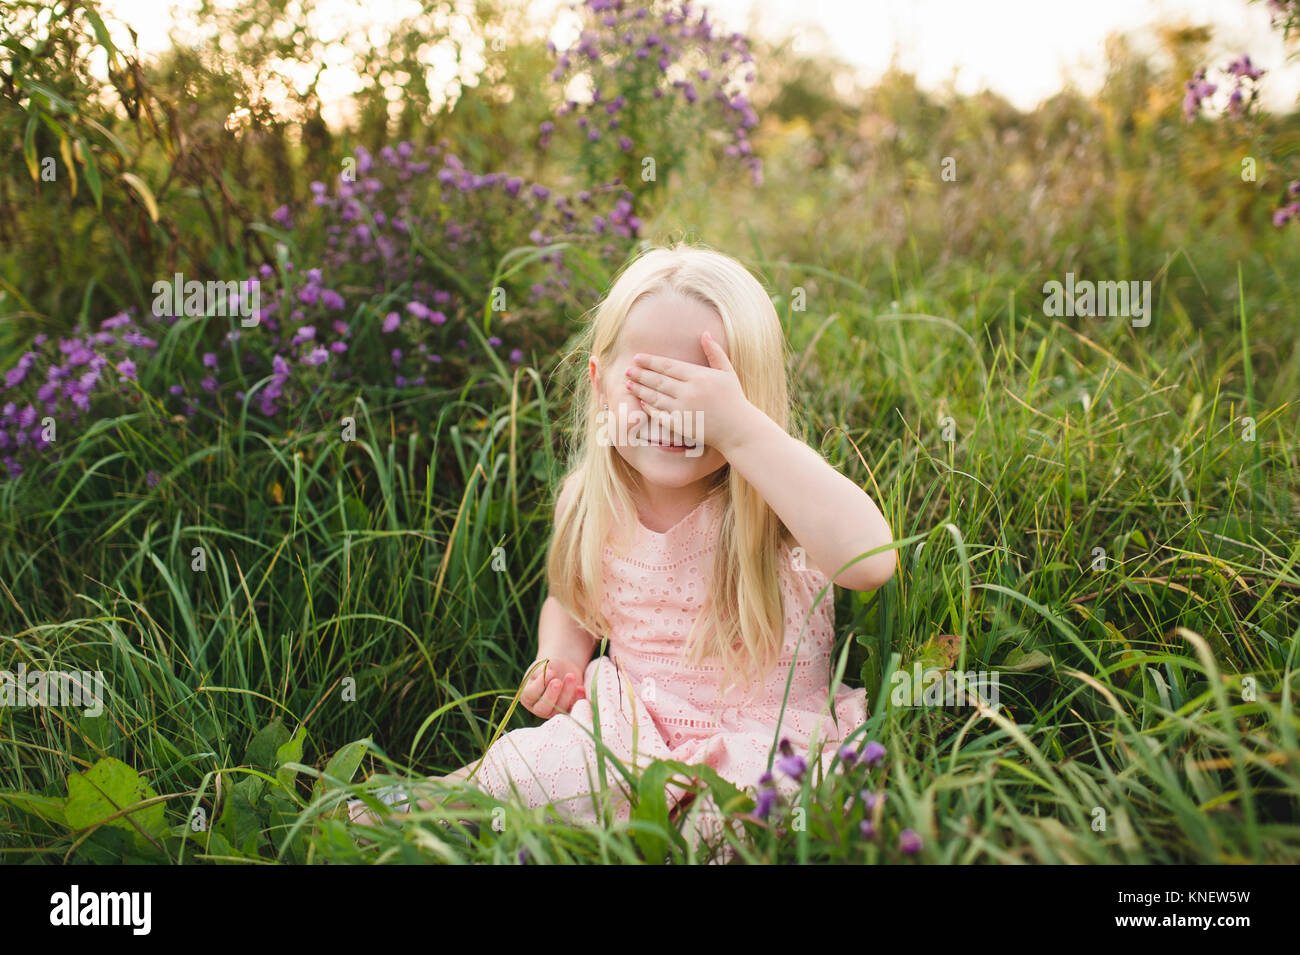 Girl sitting in tall grass, hand covering eyes Stock Photo